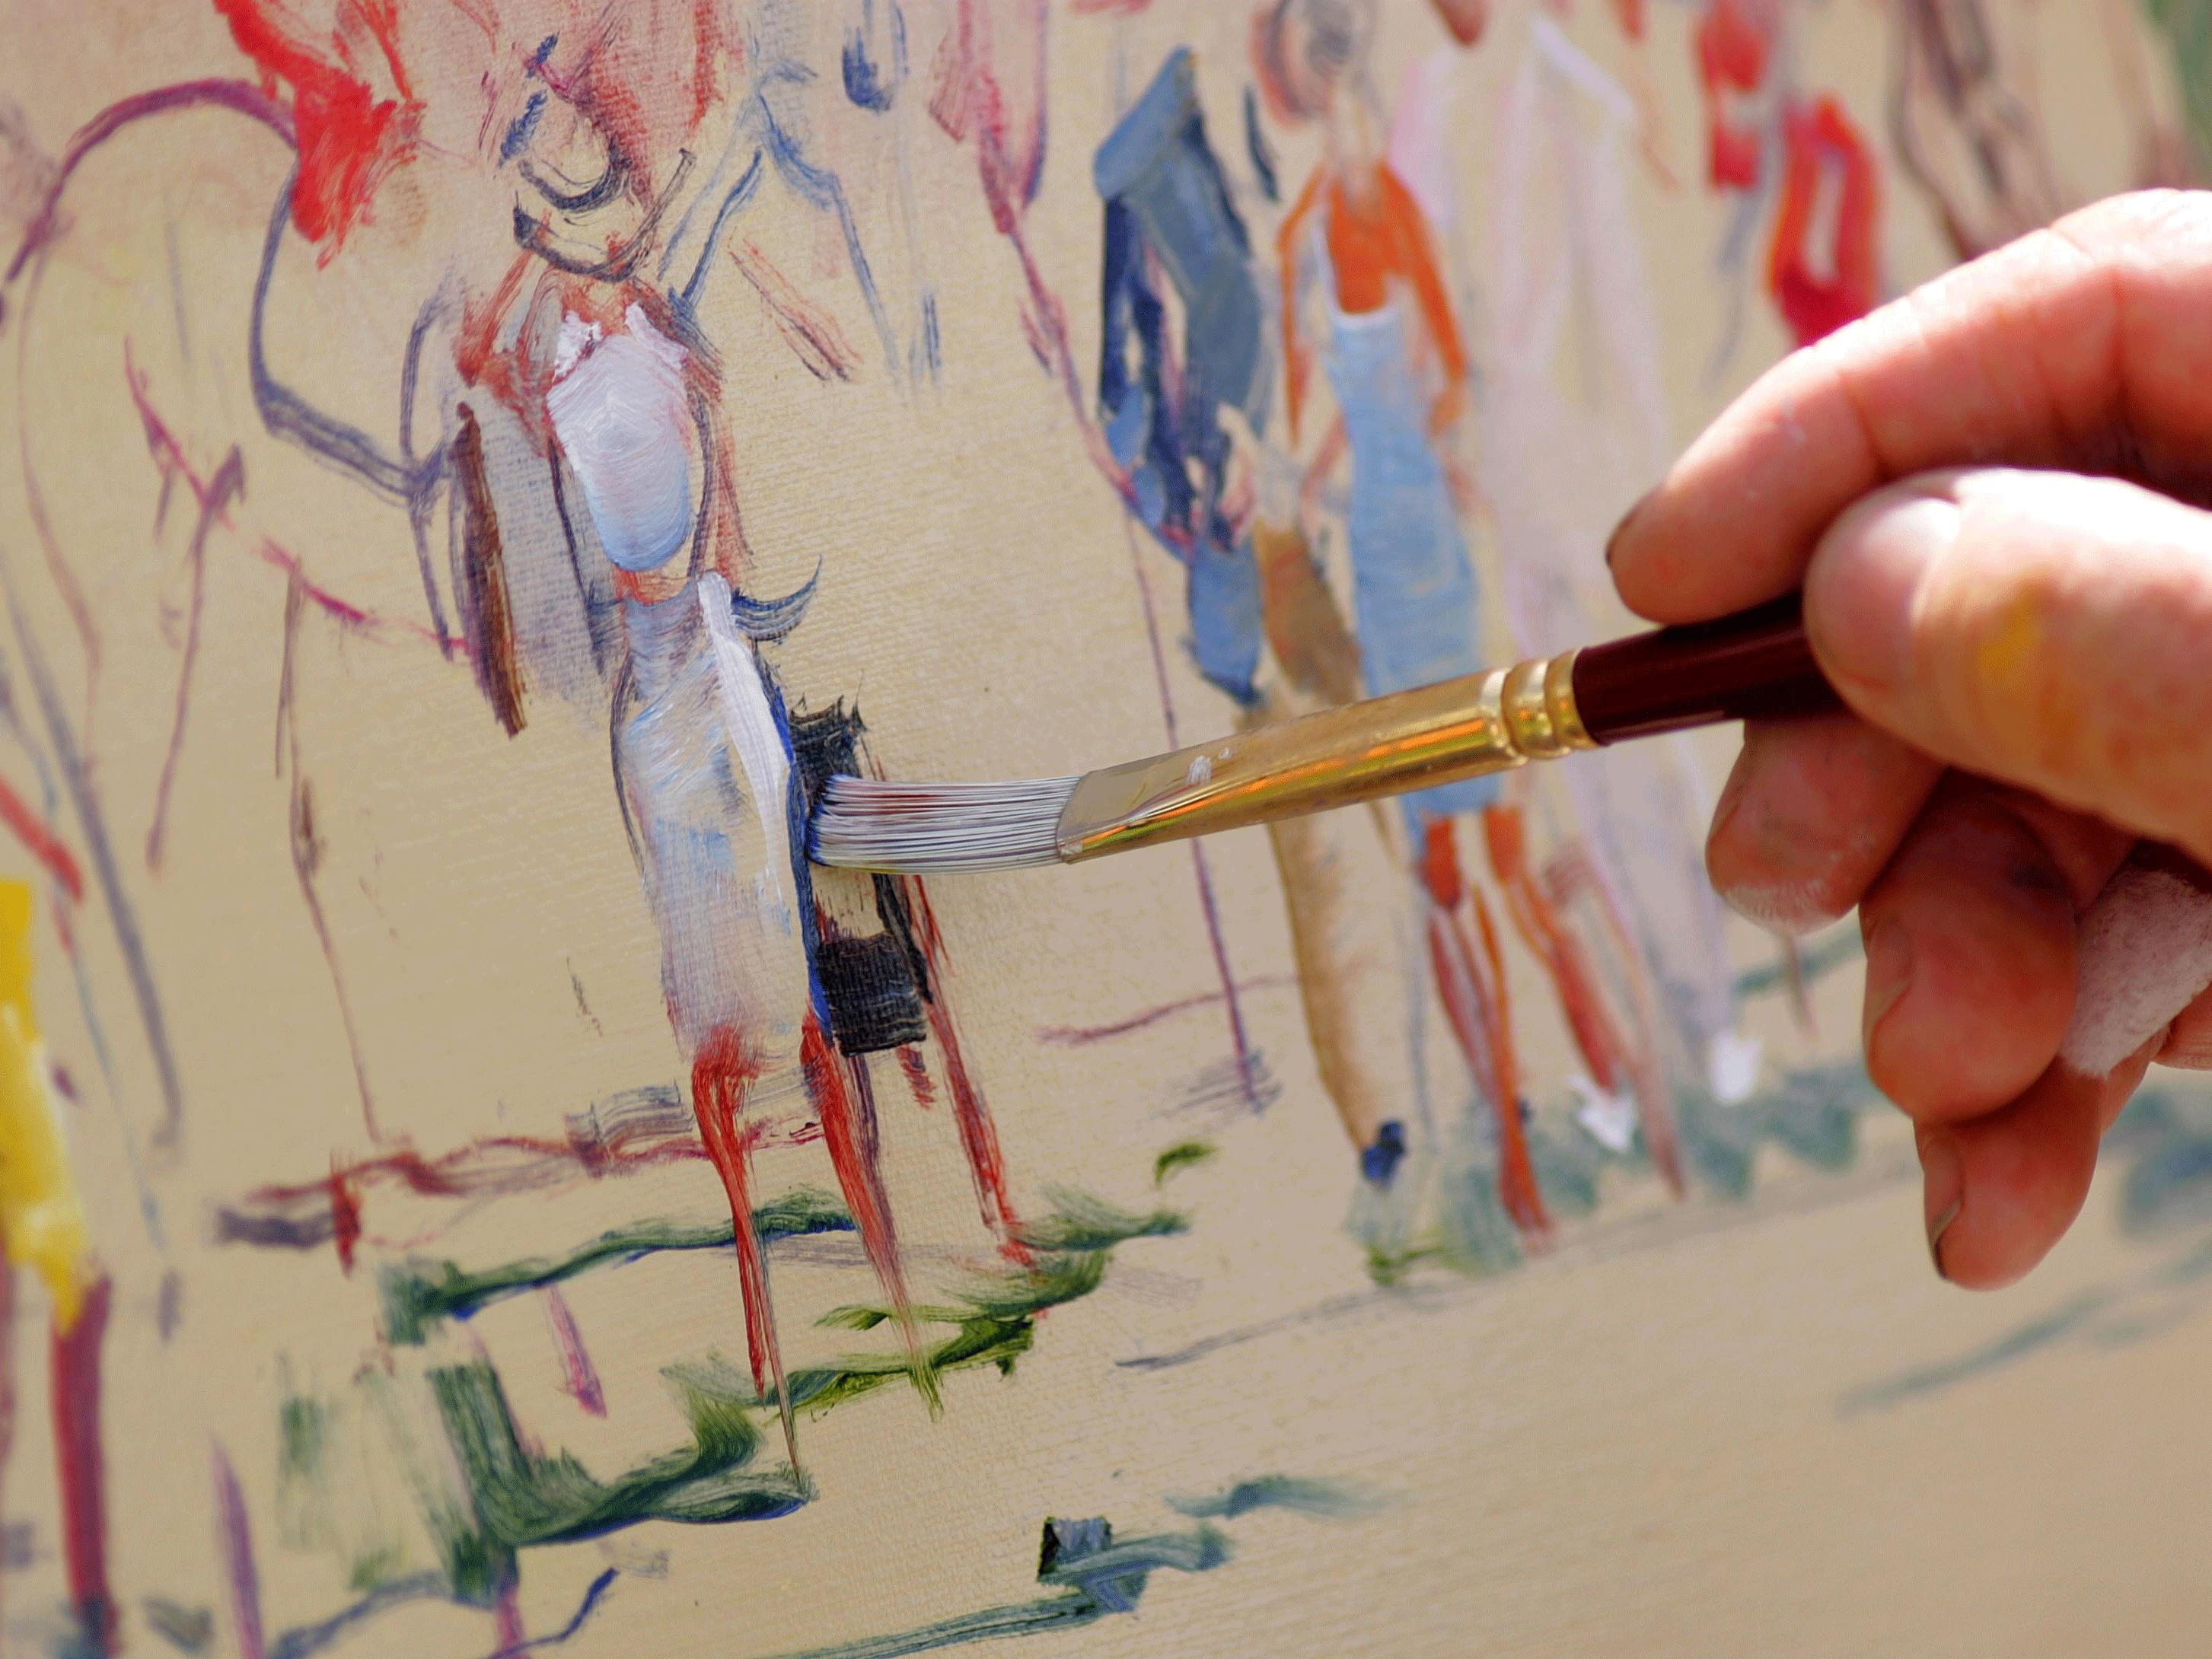 Artist Peter Williams paints a scene from the paddock during the 132nd Kentucky Derby on May 6, 2006 at Churchill Downs in Louisville, Kentucky. (Photo by Jamie Squire/Getty Images)